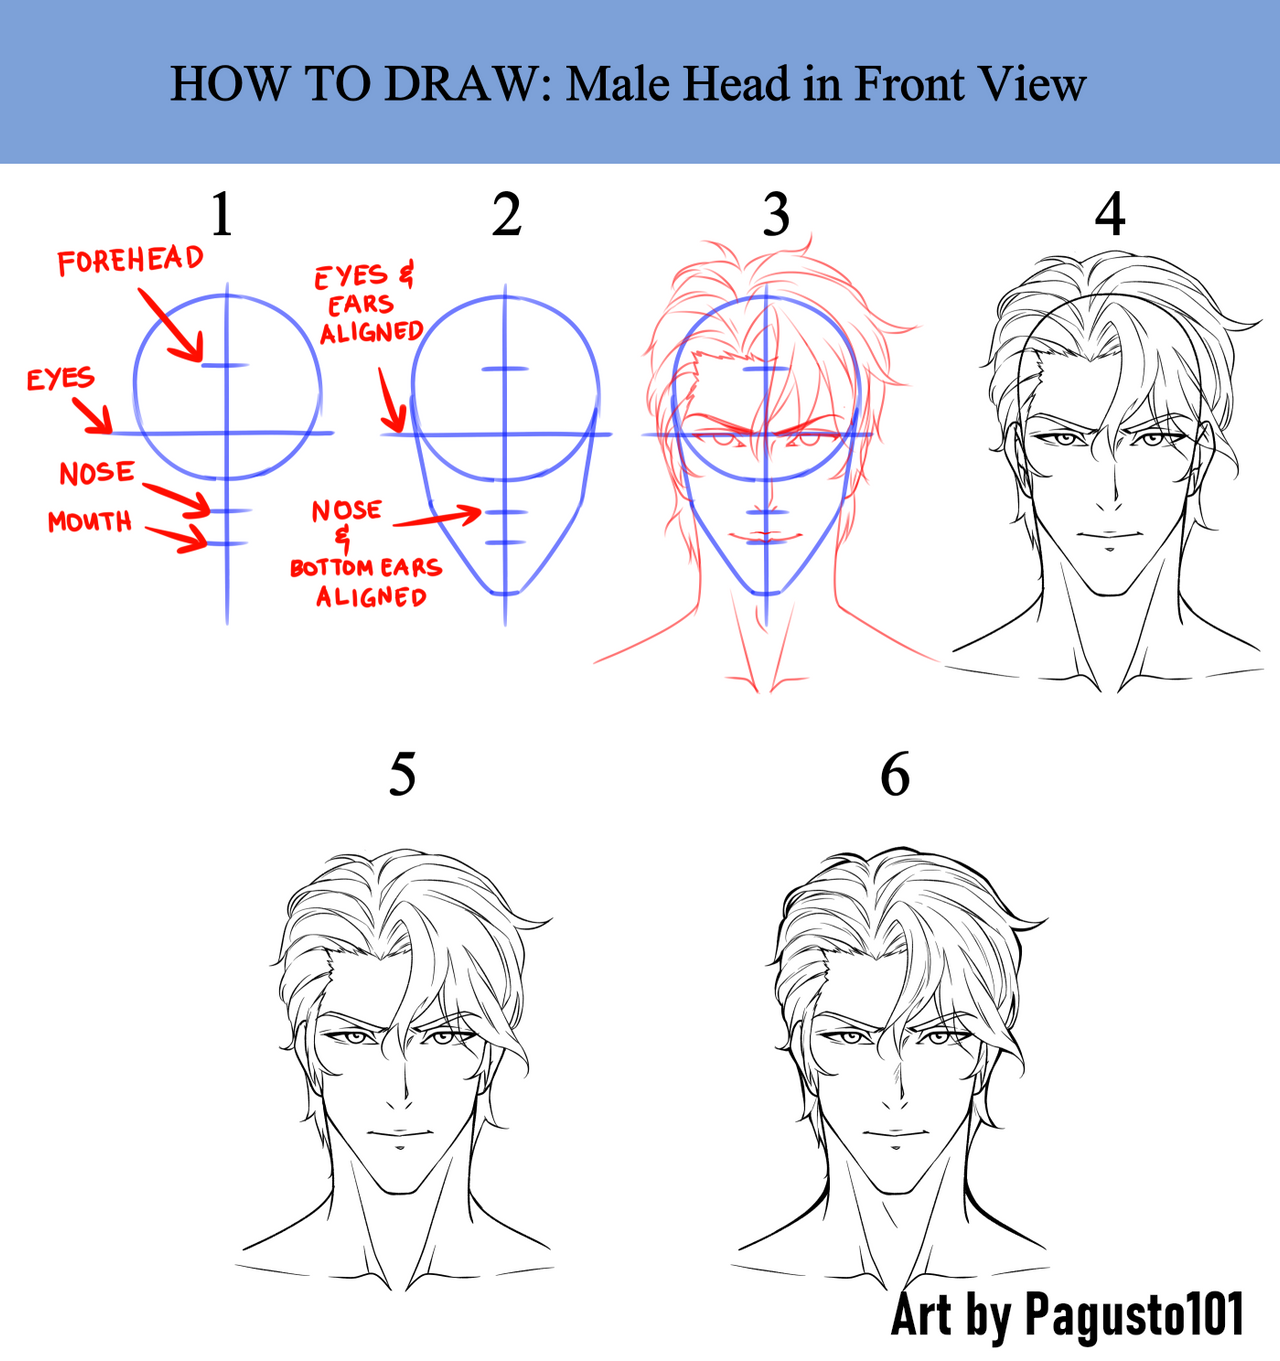 HOW TO DRAW: Male Head (Front View) by Pagusto101 on DeviantArt